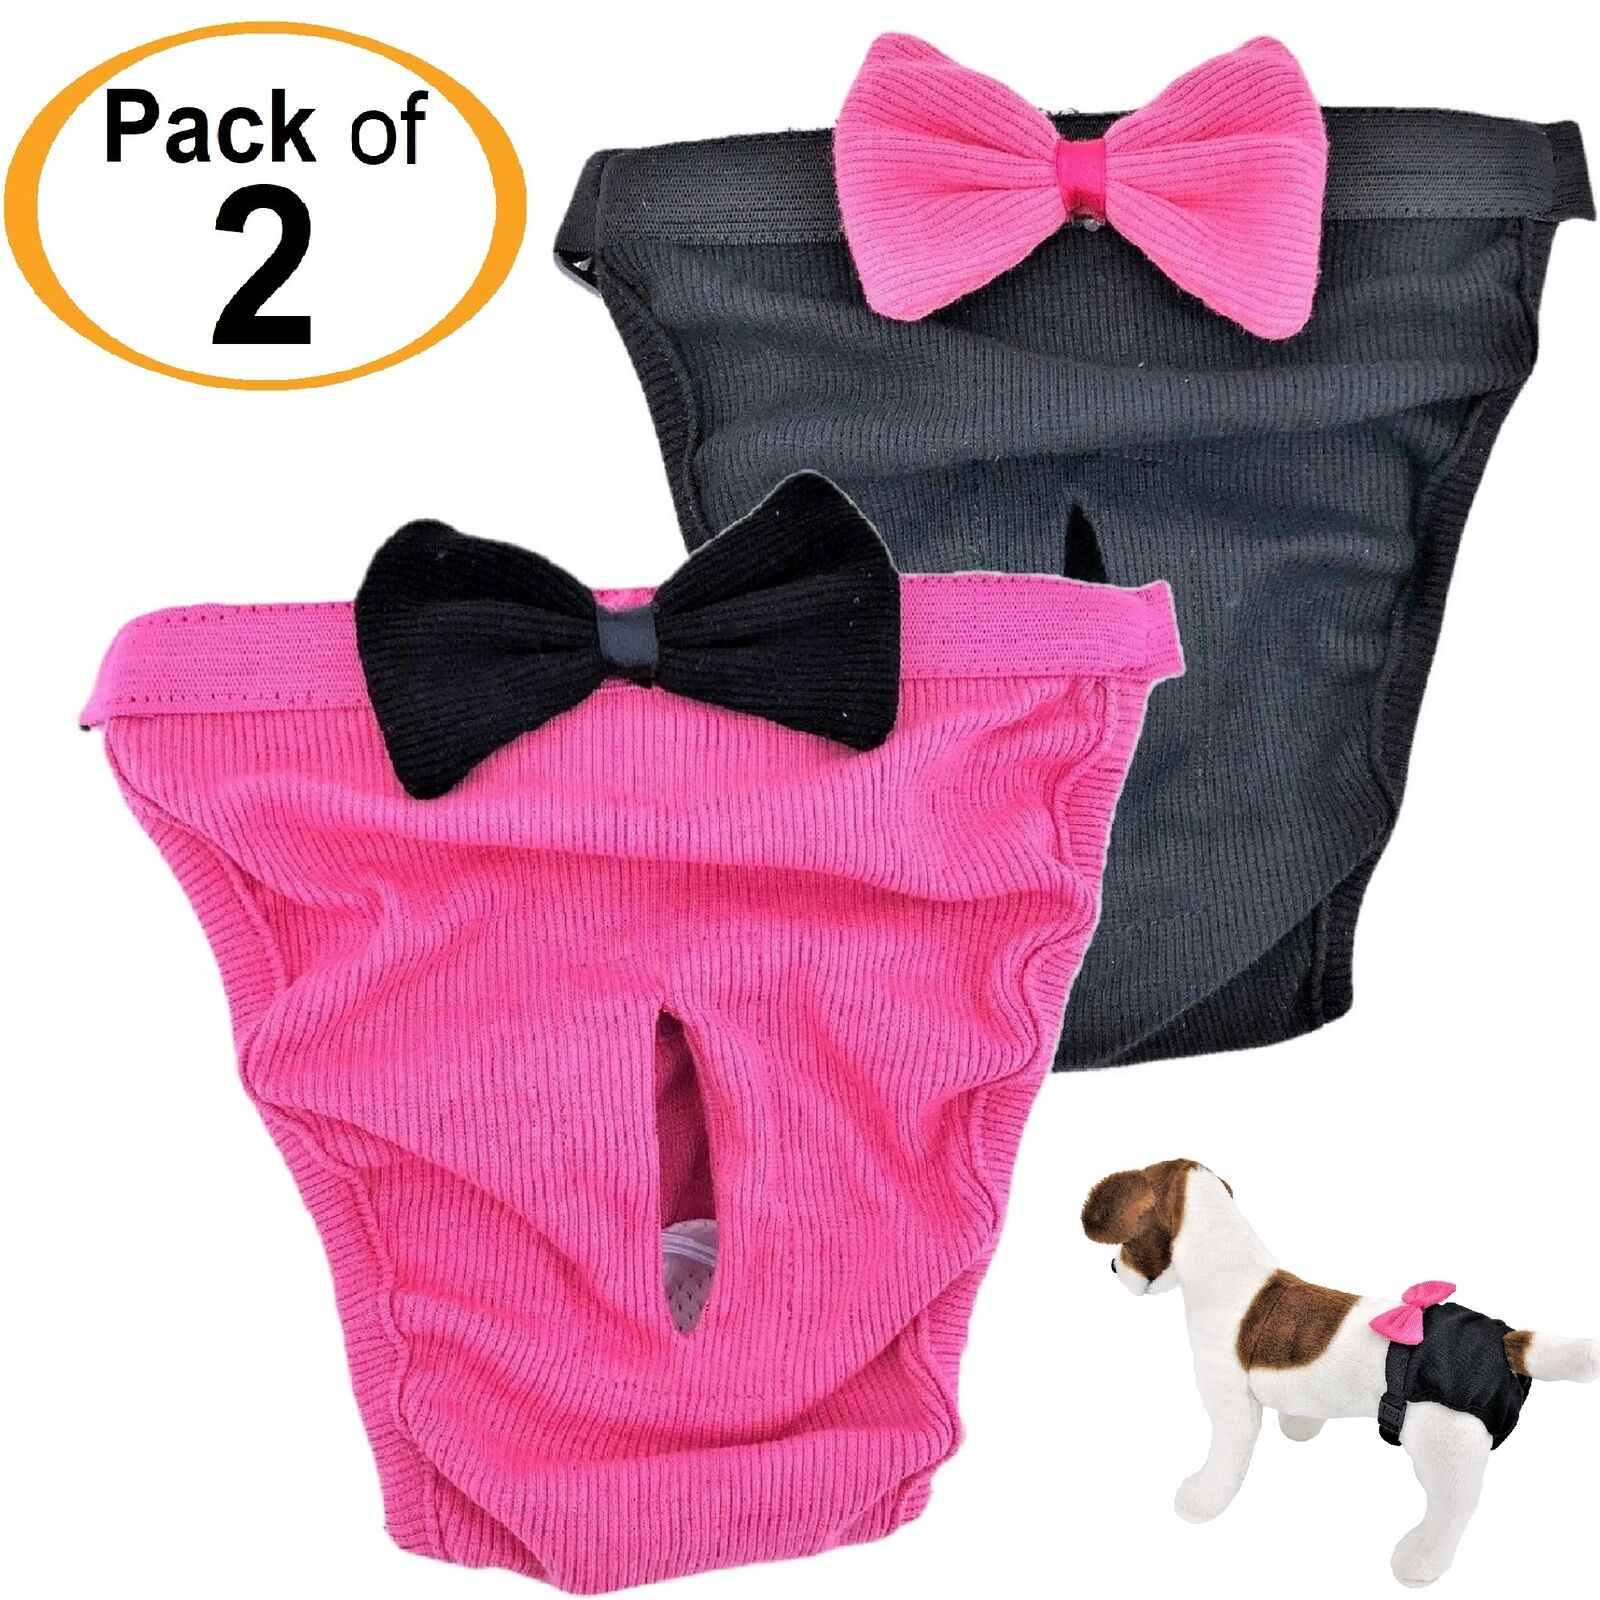 PACK- 2 Dog Diapers Female Cat Girl SMALL and LARGE Pets 100% Cotton Pink Black